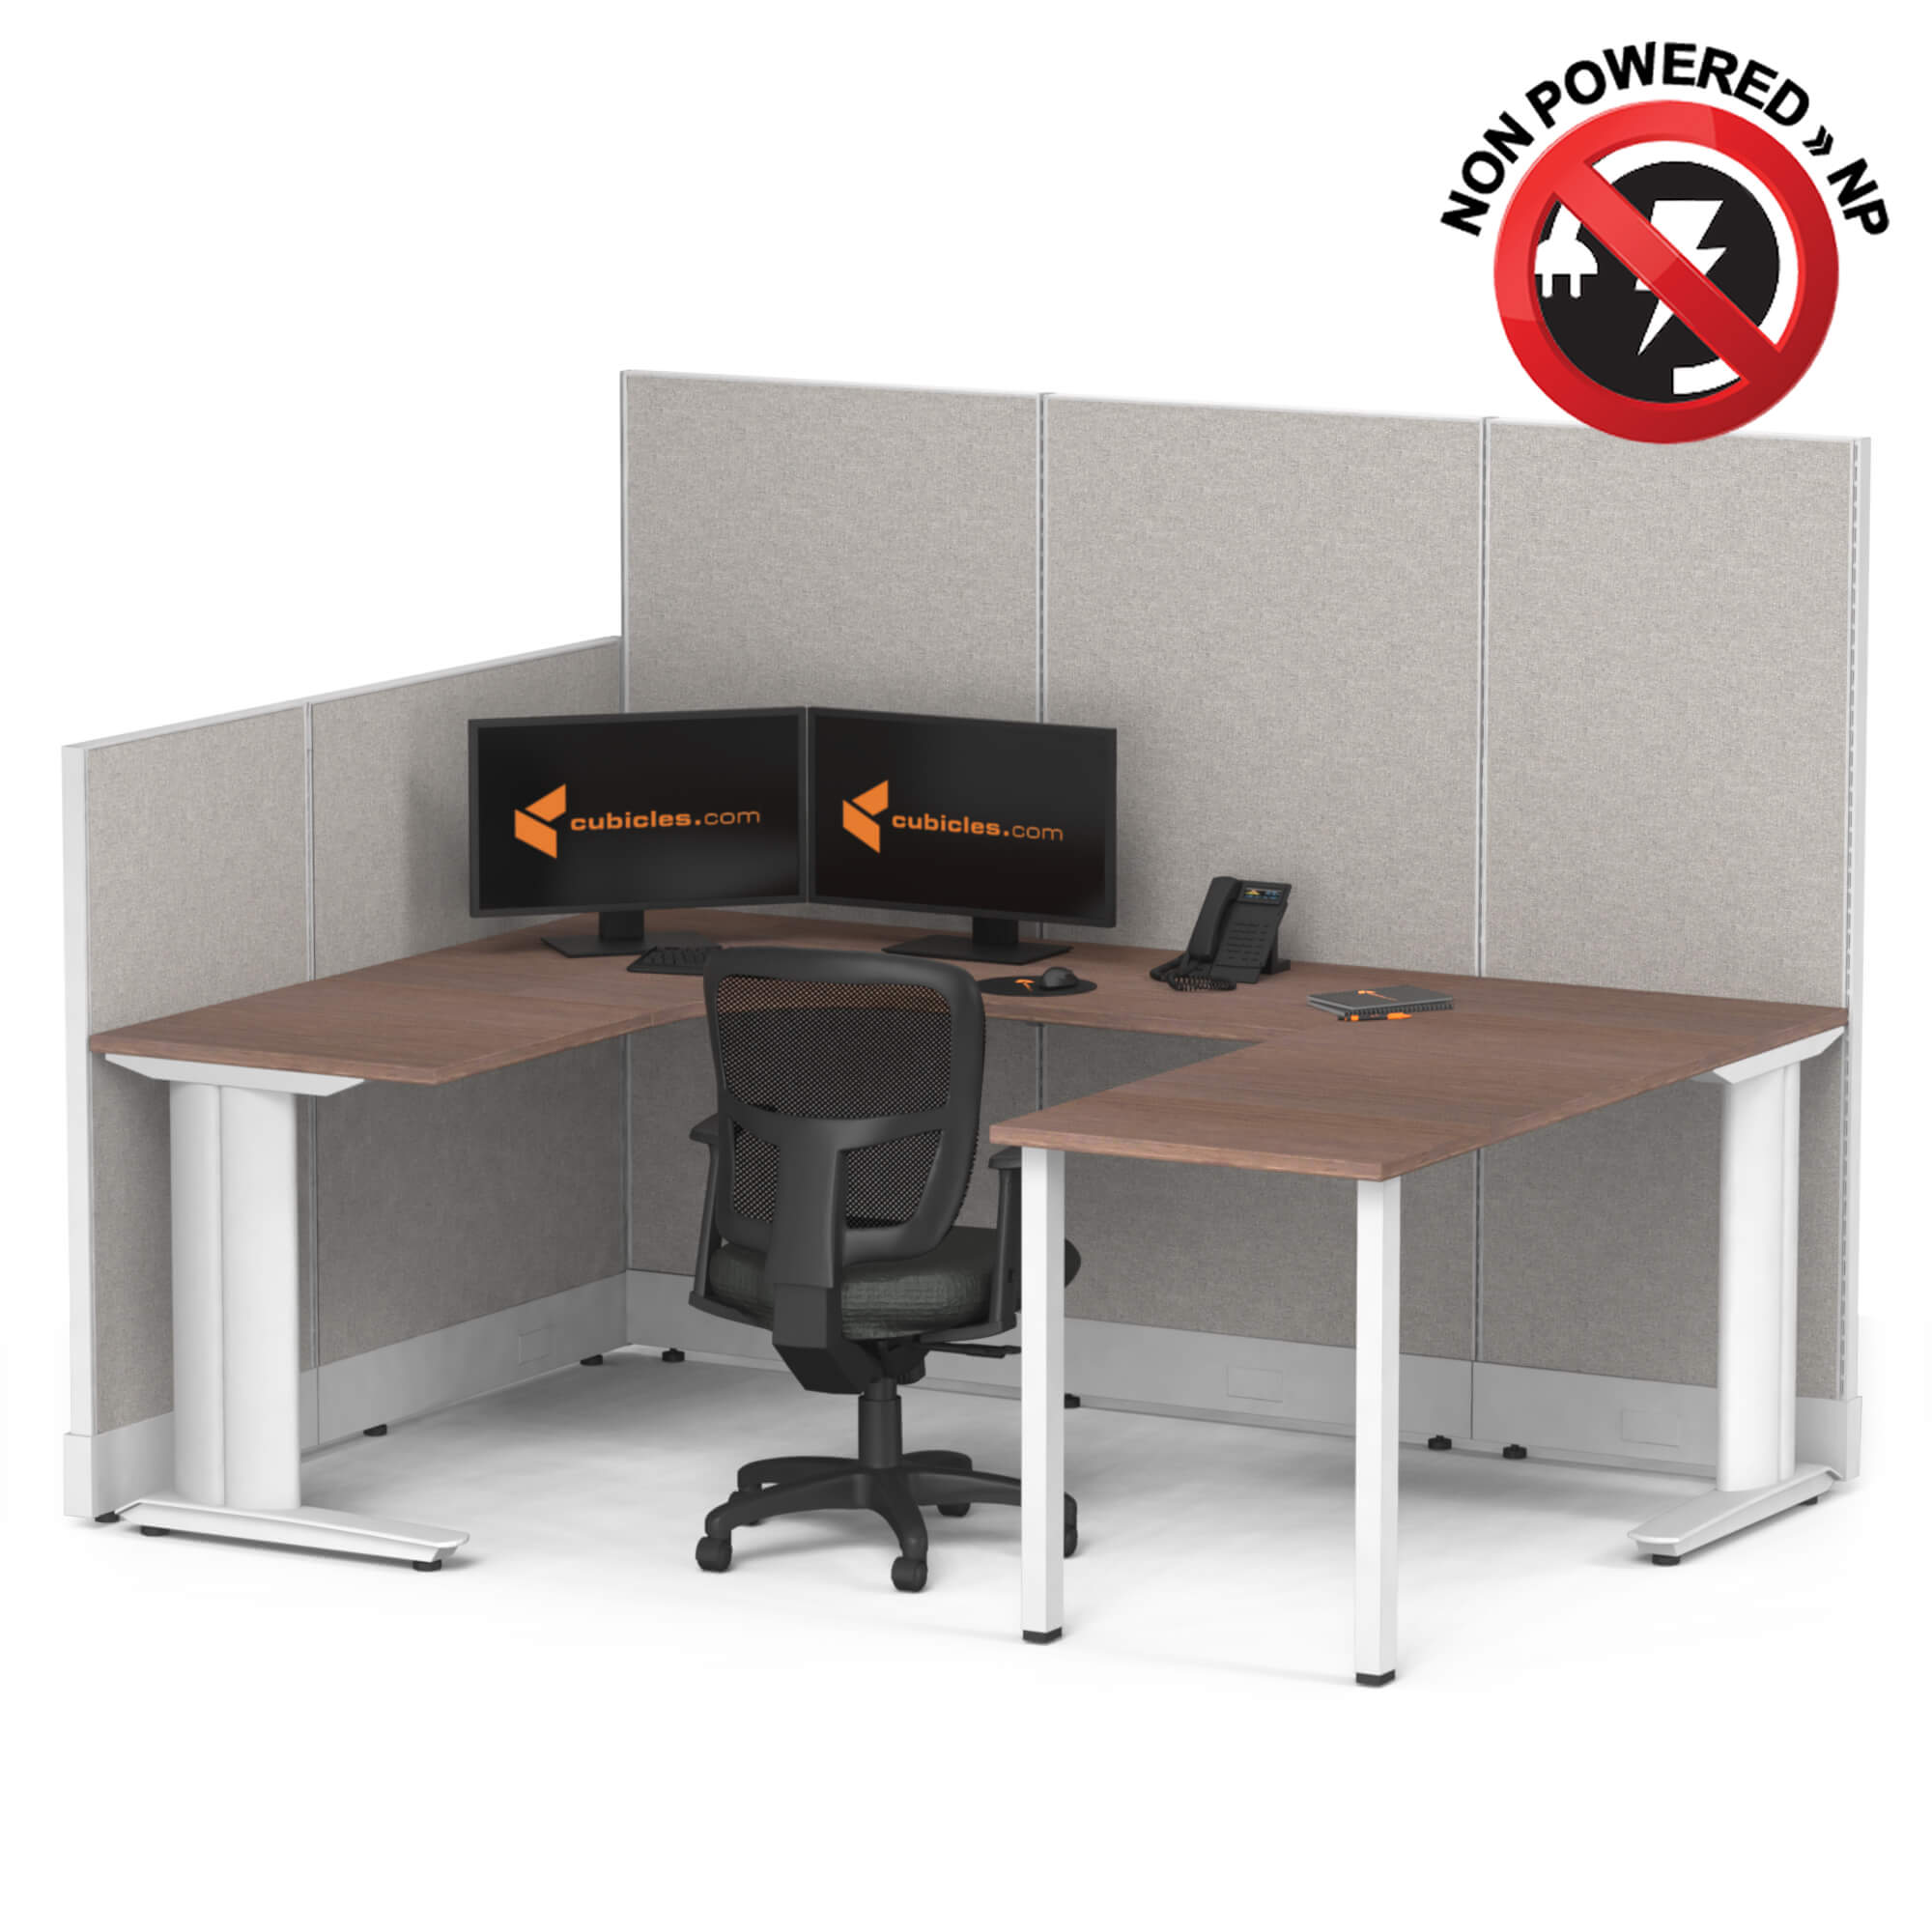 Cubicle desk u shaped 1pack non powered